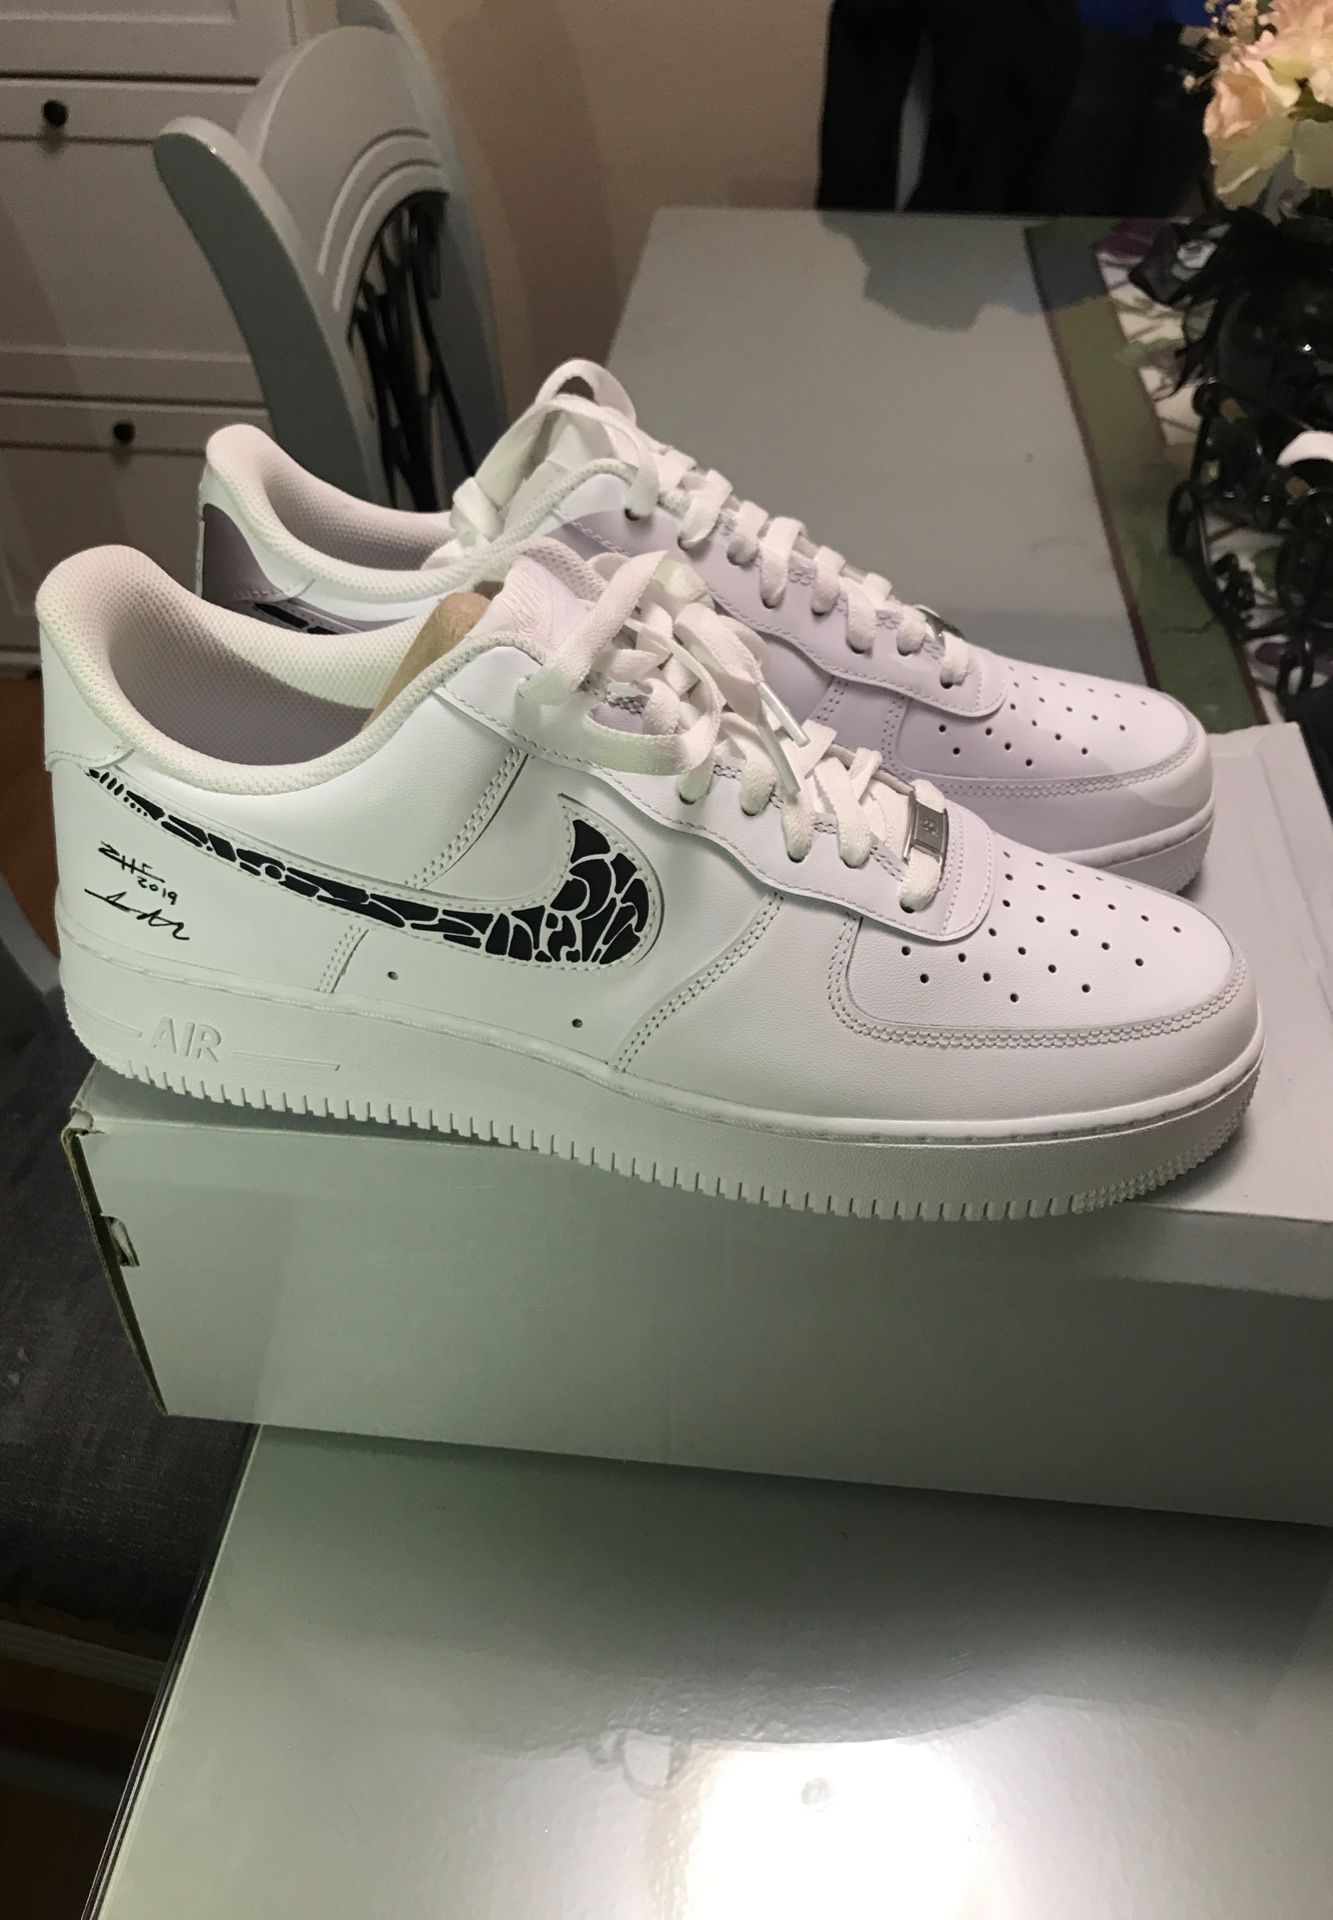 Nike Air Force 1 ‘07 signed by YouTuber ZHC